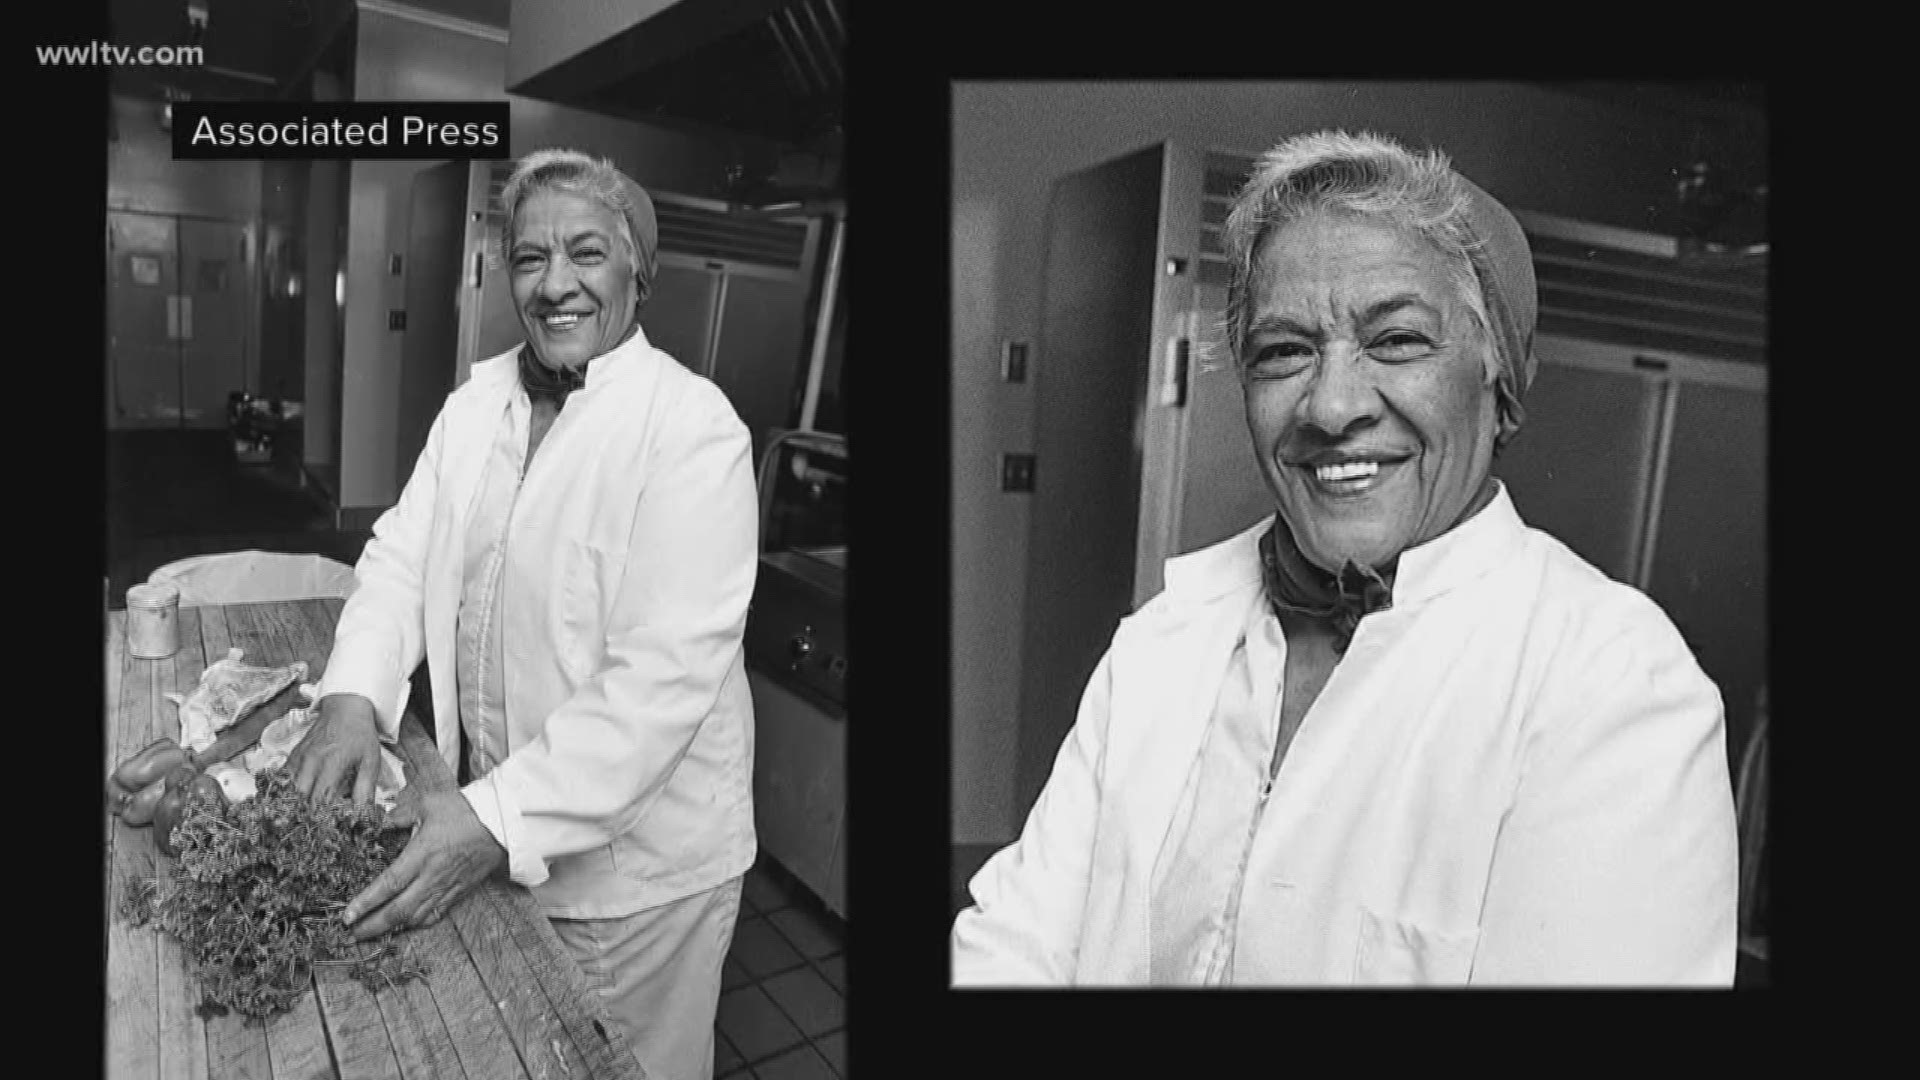 Her restaurant, Dooky Chase, became a safe haven for blacks and whites to meet during the civil rights movement.